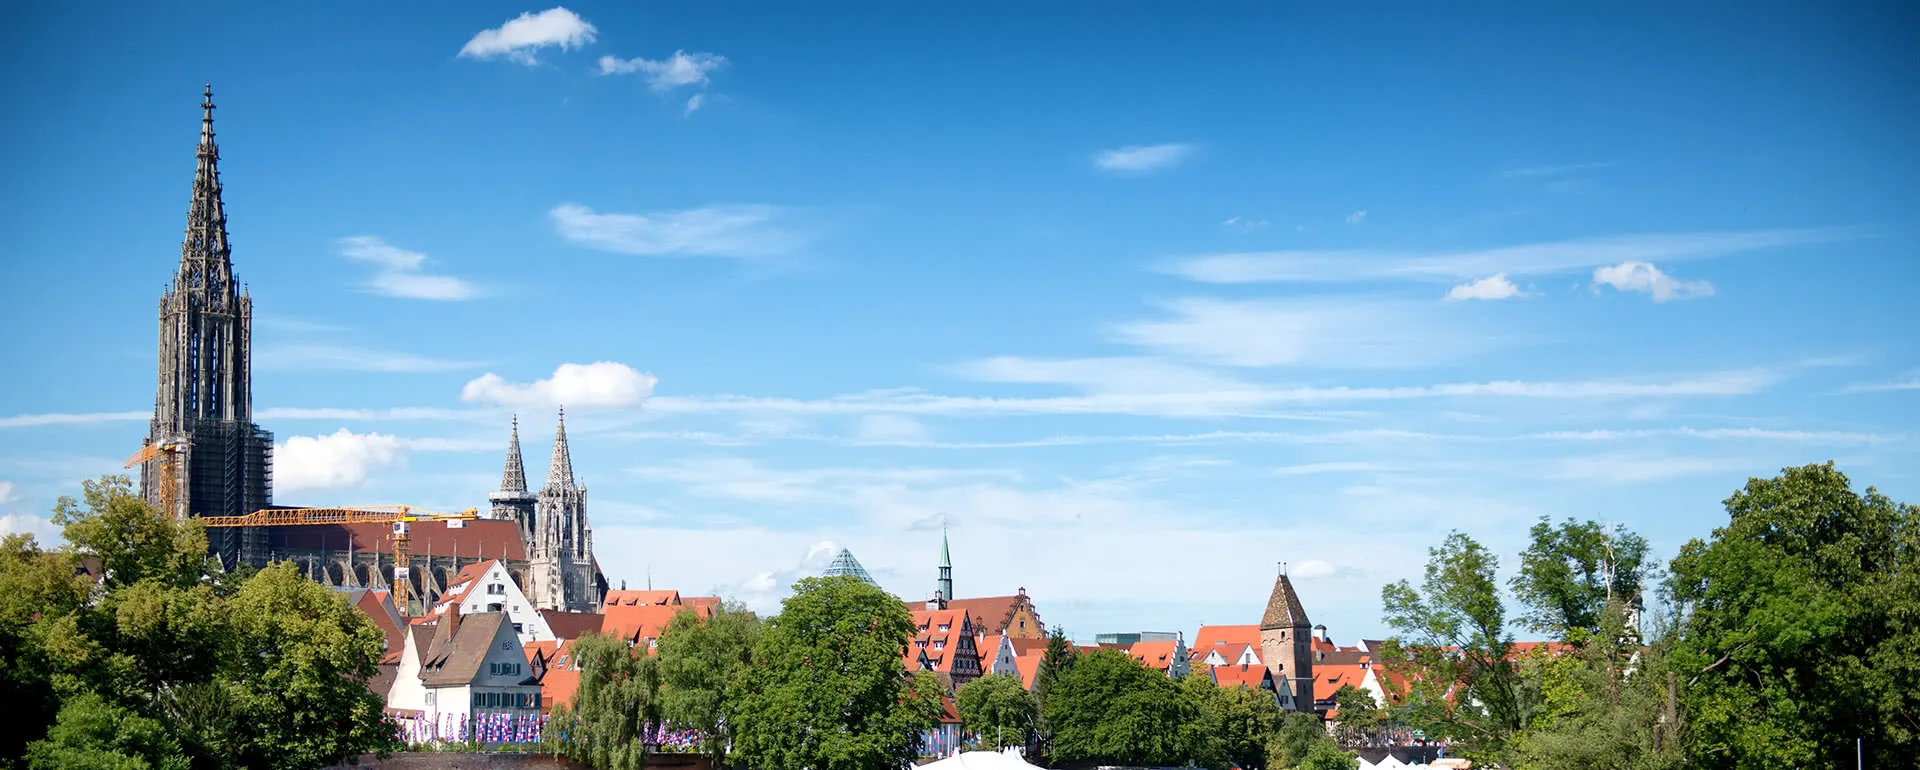 Ulm - the destination for company trips